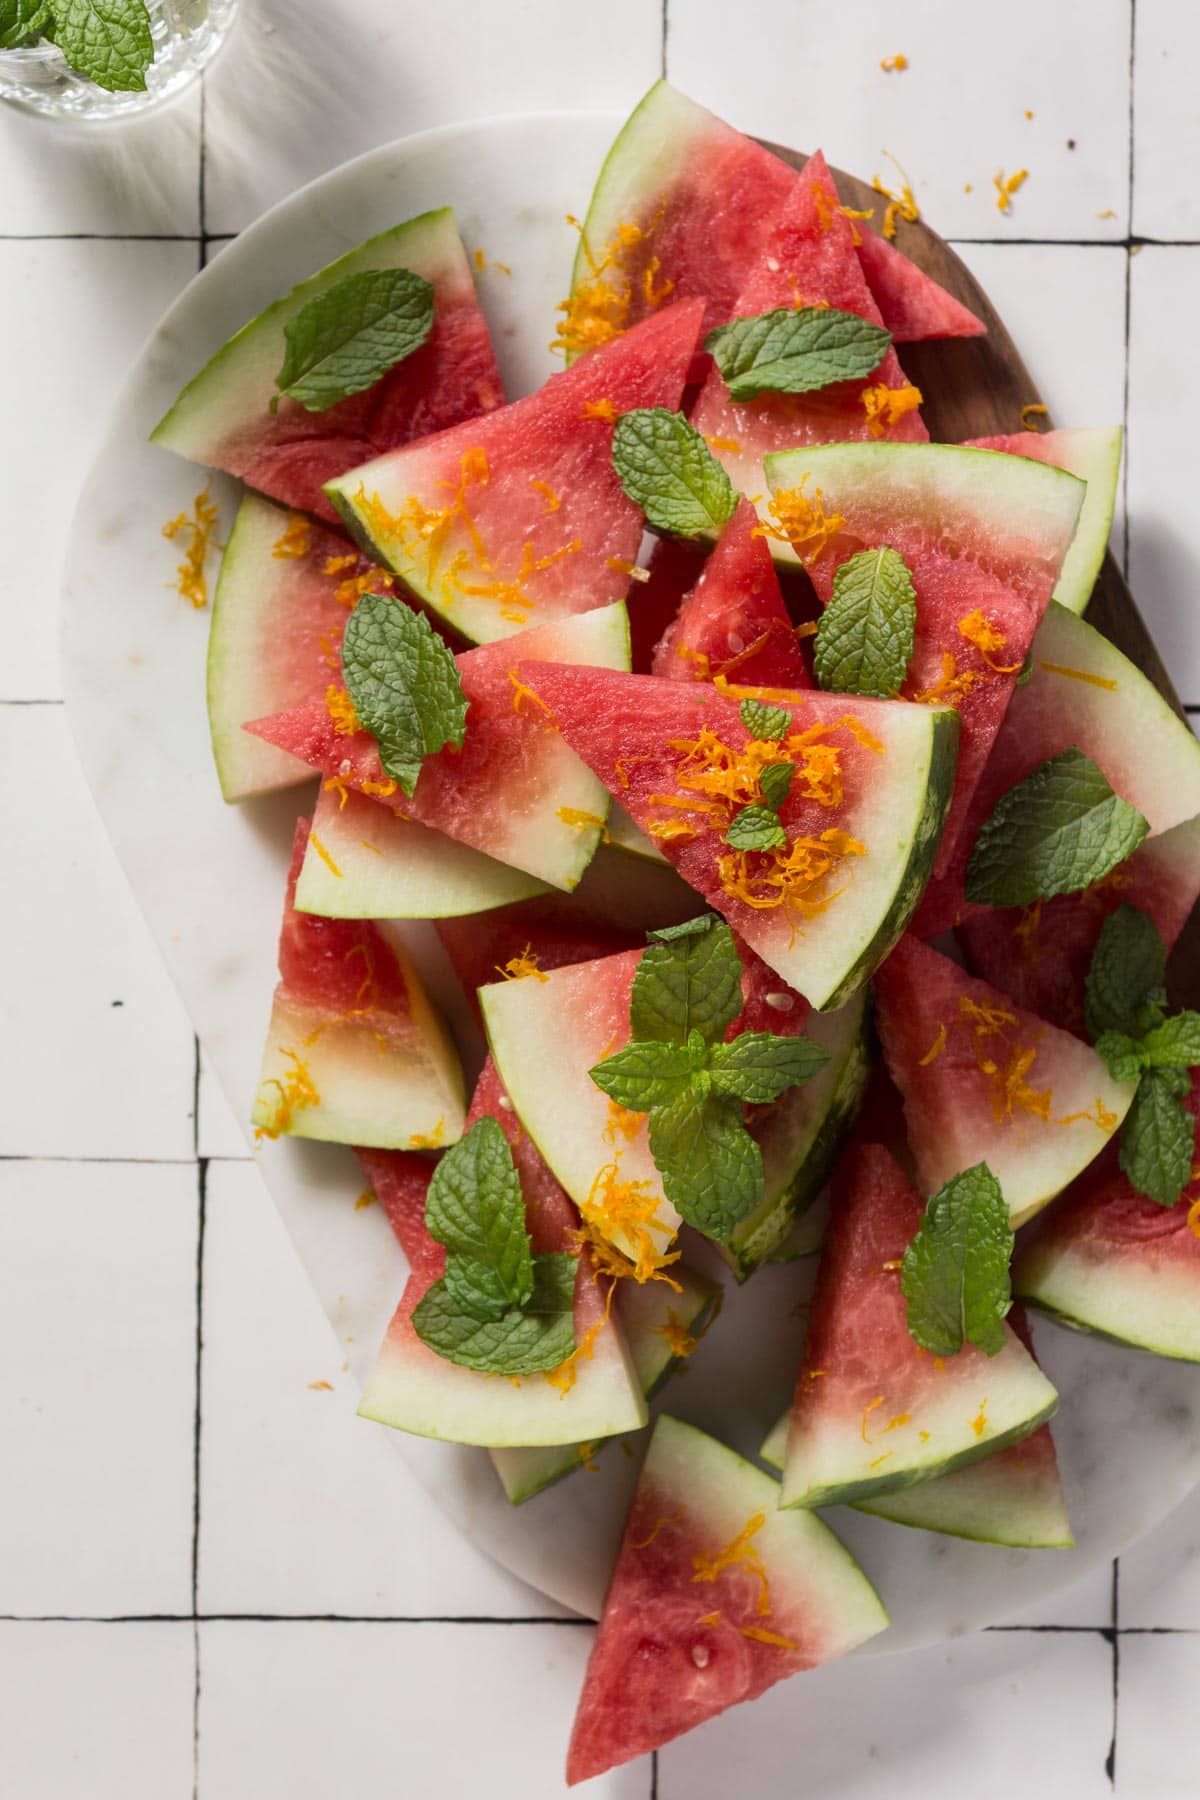 Watermelon triangles sliced on a platter